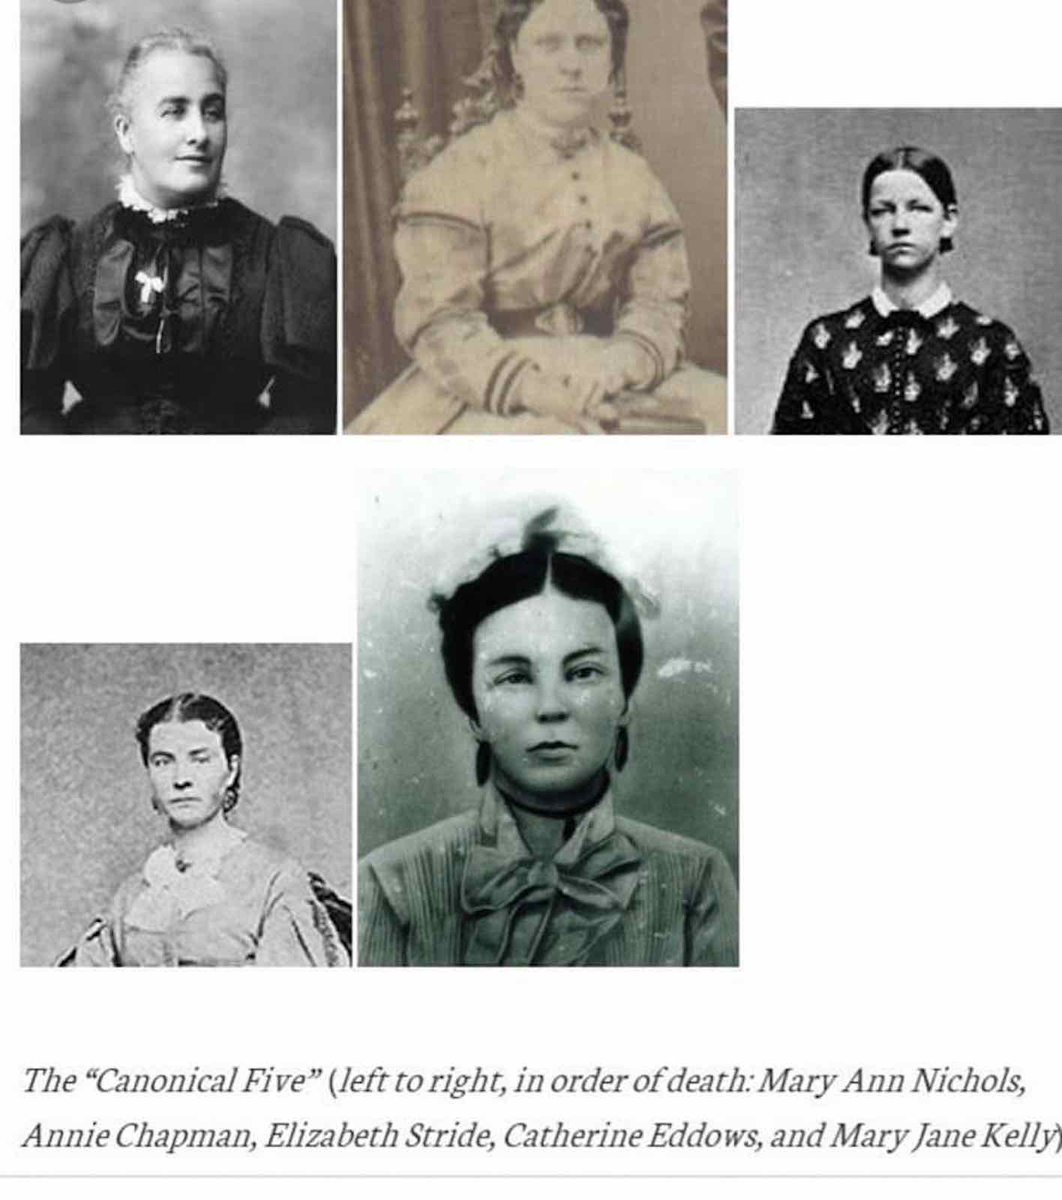 The canonical five Ripper victims are Mary Ann Nichols, Annie Chapman, Elizabeth Stride, Catherine Eddowes, and Mary Jane Kelly